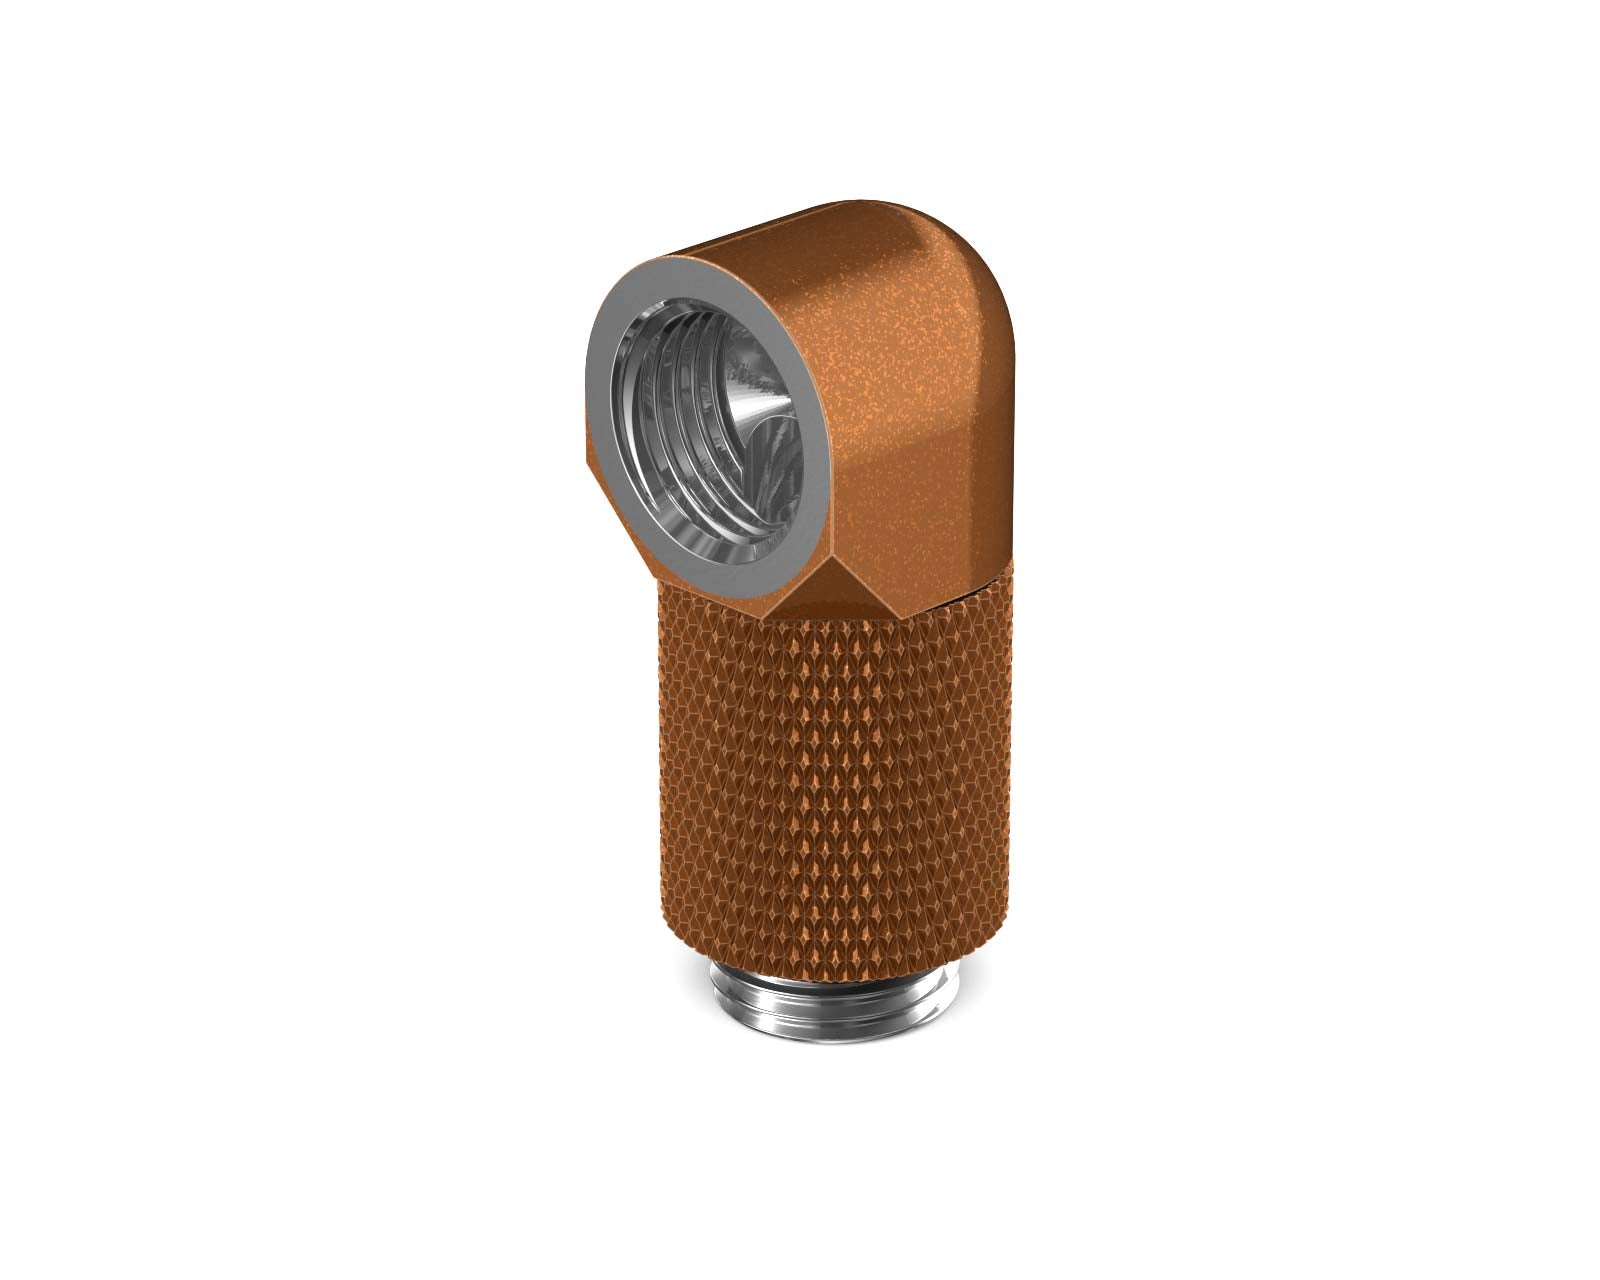 PrimoChill Male to Female G 1/4in. 90 Degree SX Rotary 20mm Extension Elbow Fitting - PrimoChill - KEEPING IT COOL Copper